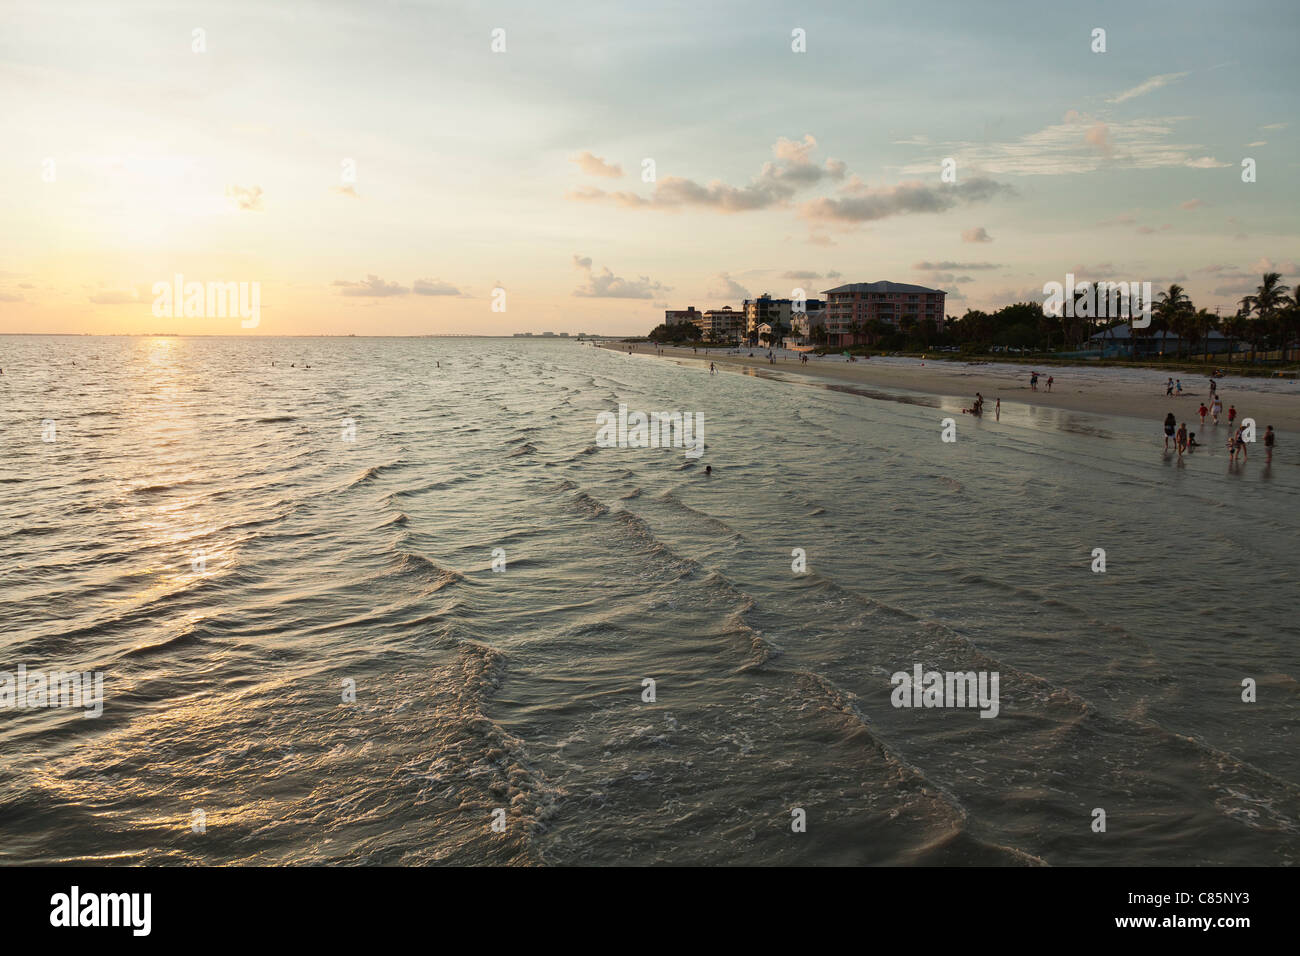 People at the beach at sunset, Fort Myers Beach, Florida, USA Stock Photo